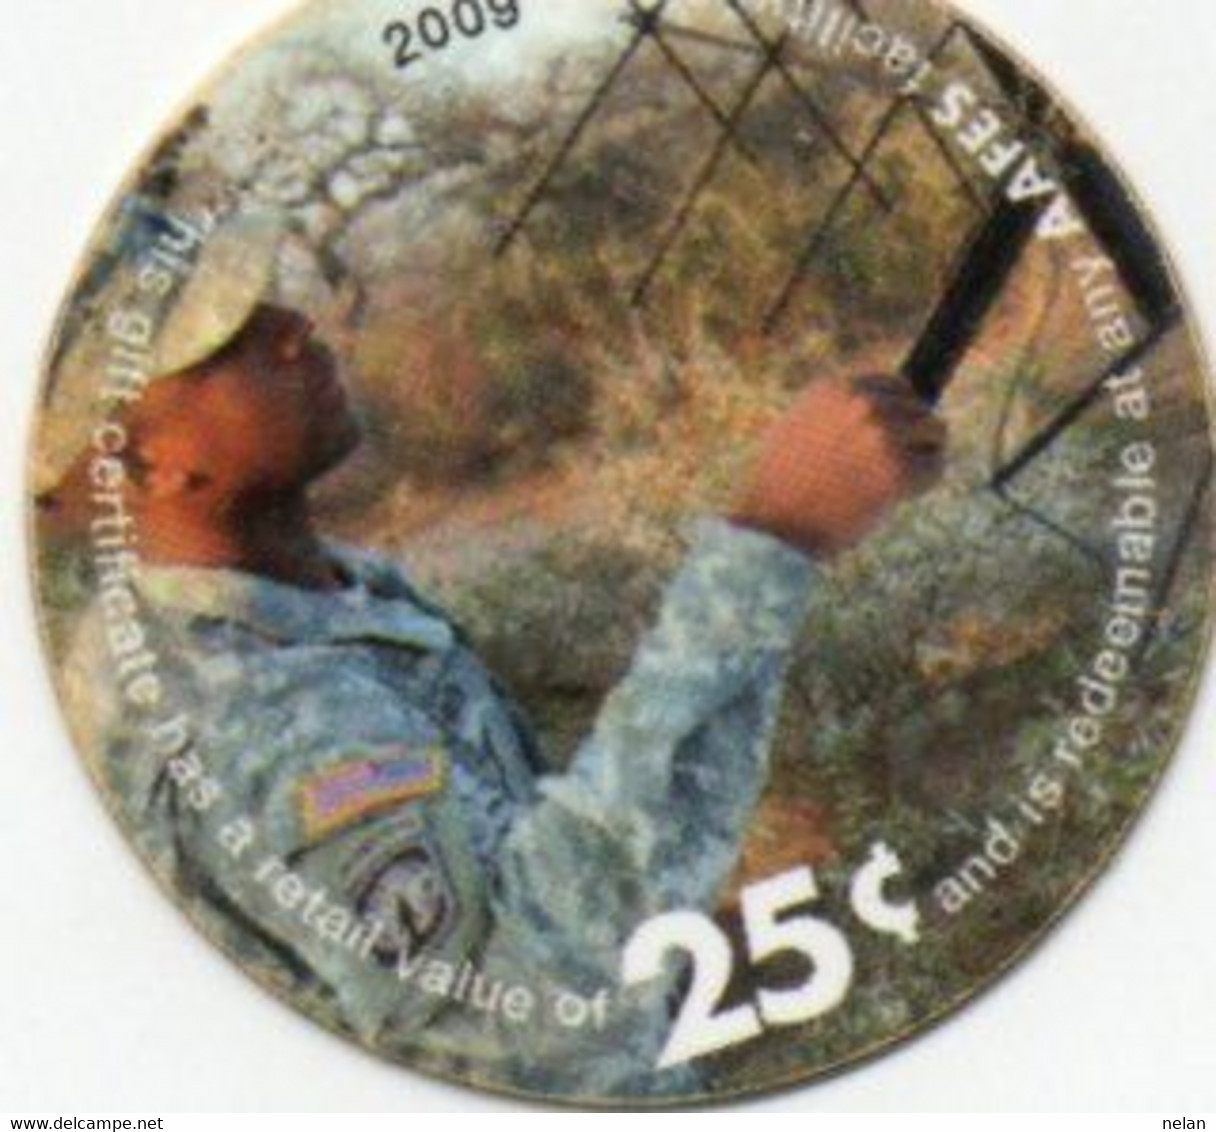 Stati Uniti D'America - 25 Cents - 2009  -Military Payment AAFES Certificates Series 13th Issue -Wor:P-M516 - Plastic - Series 701 (unissued)